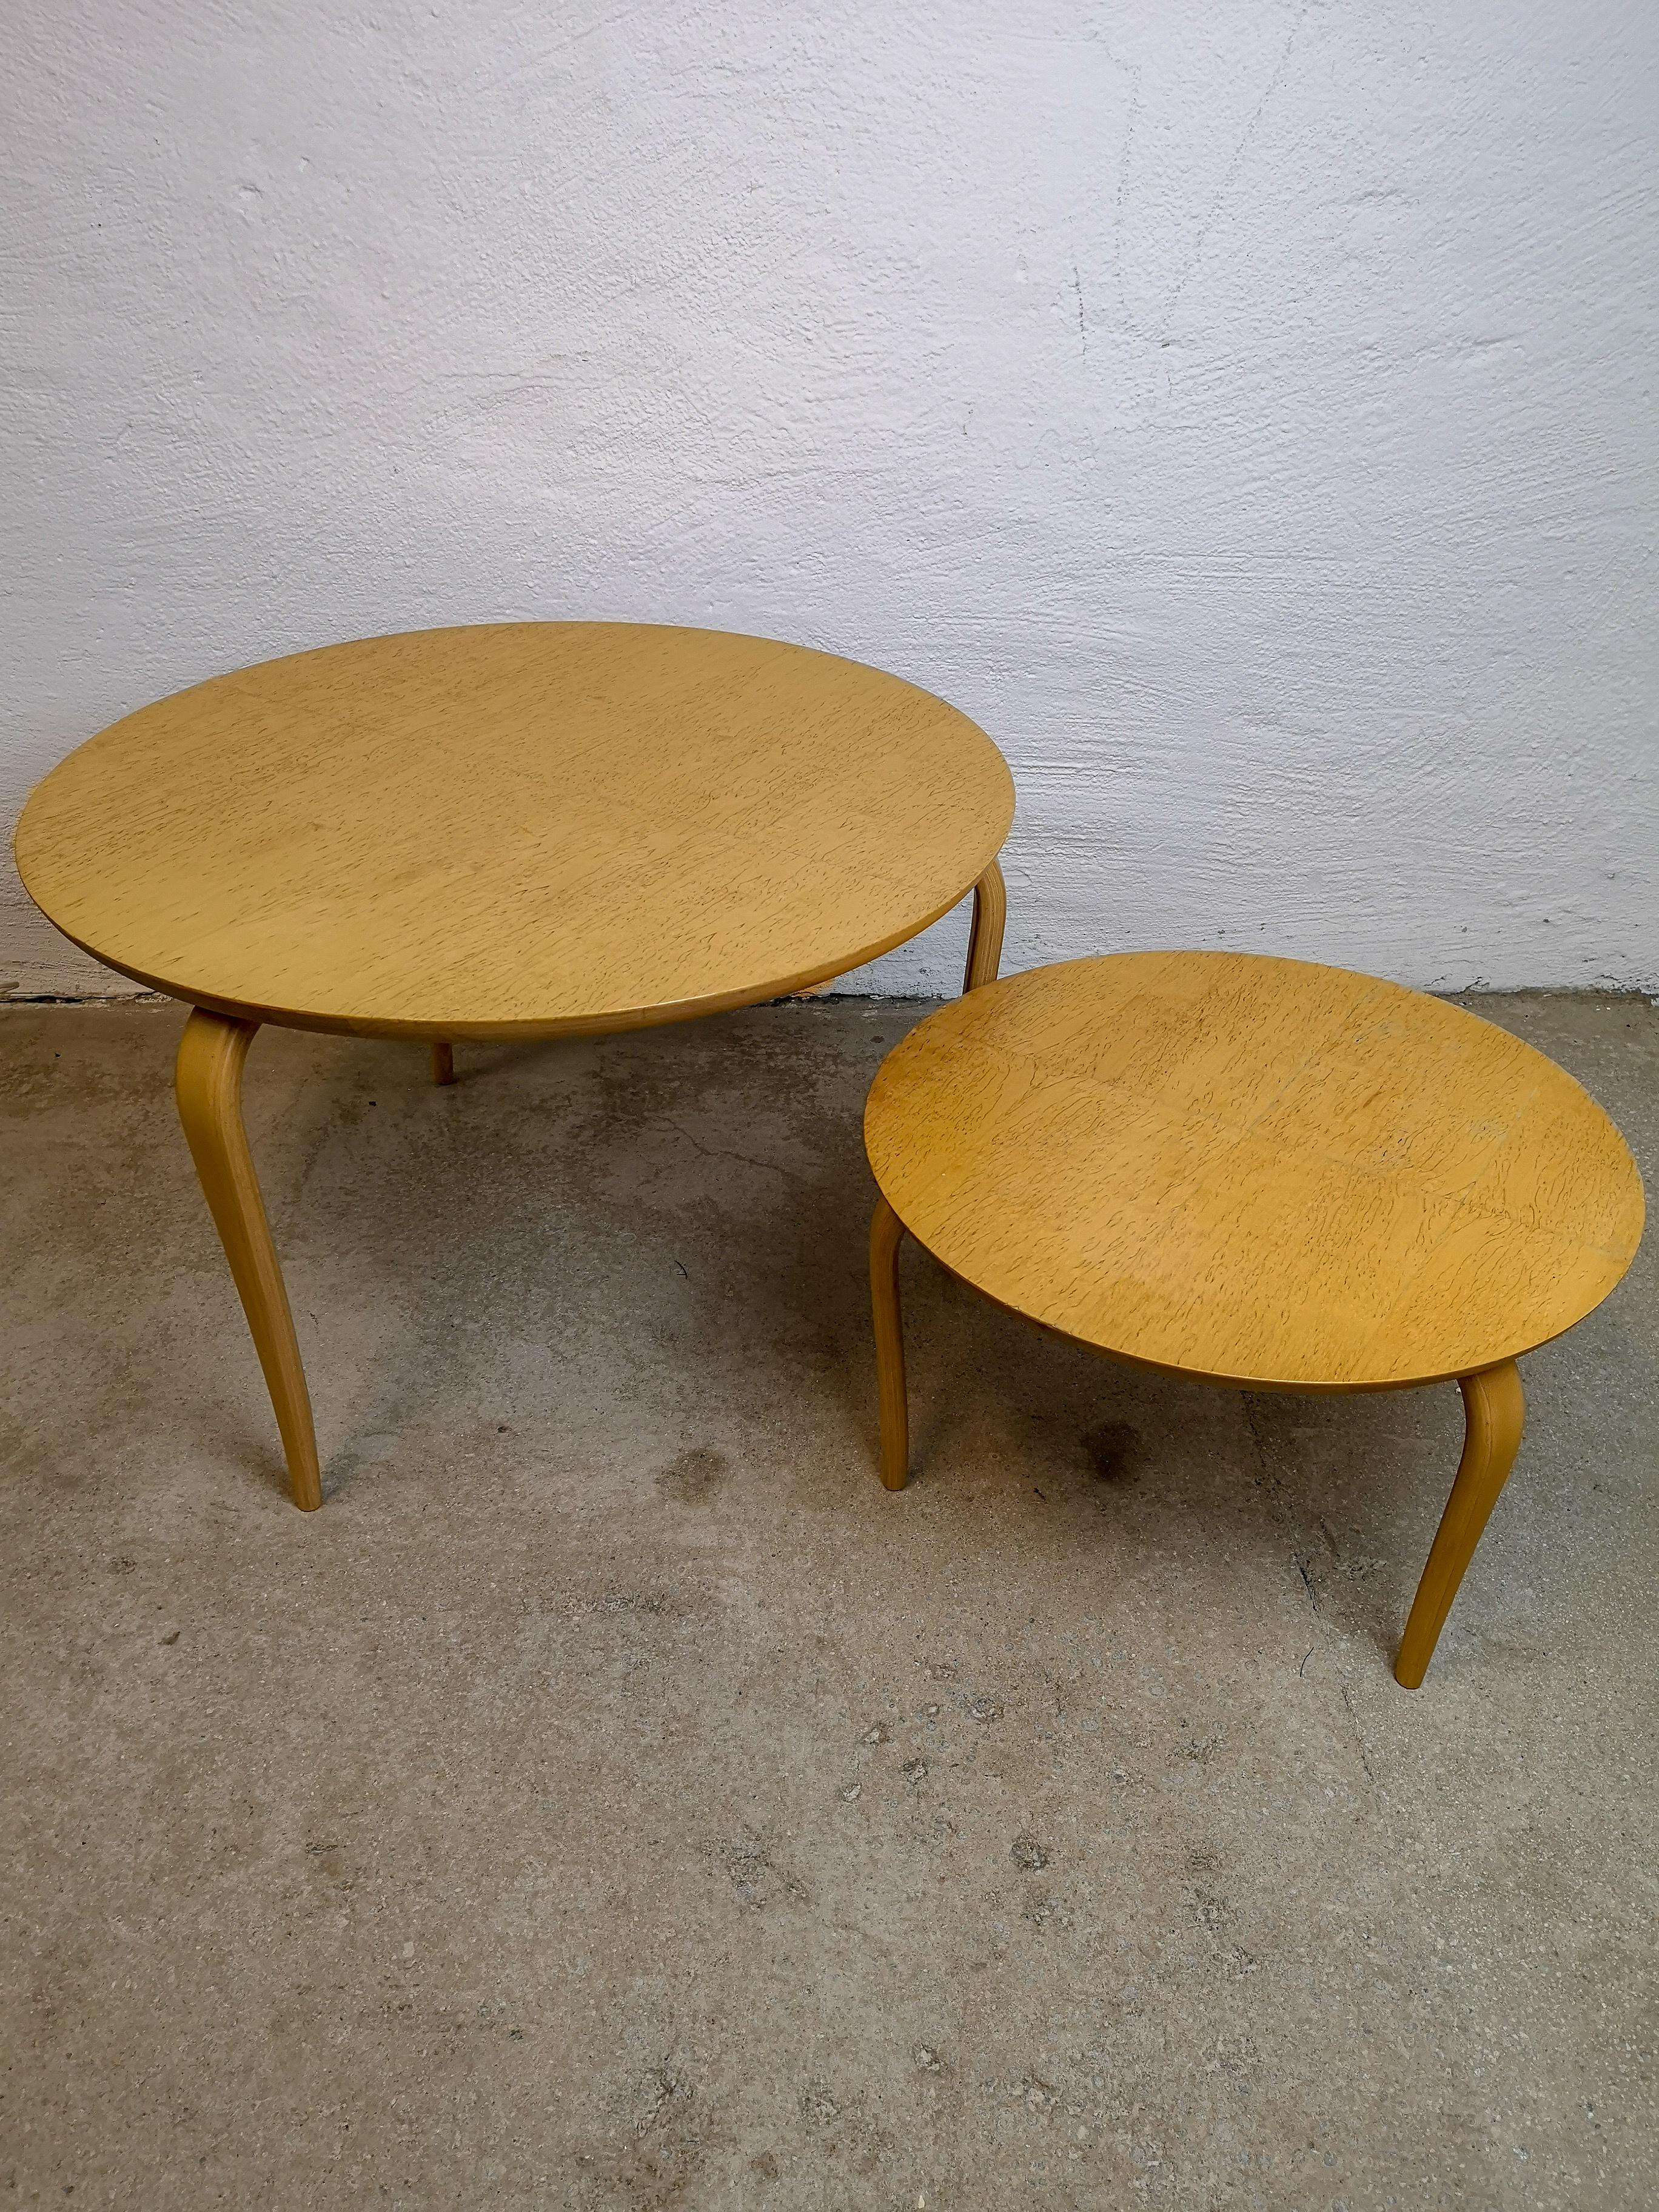 Two nicely designed tables manufactured by Dux in Sweden, early 1980s. The design of Bruno Mathsson makes the tables Slender legs work with the top of the table made in Birch and Karelian birch.

Good condition. 

Measures: H 42, D 65 cm and H